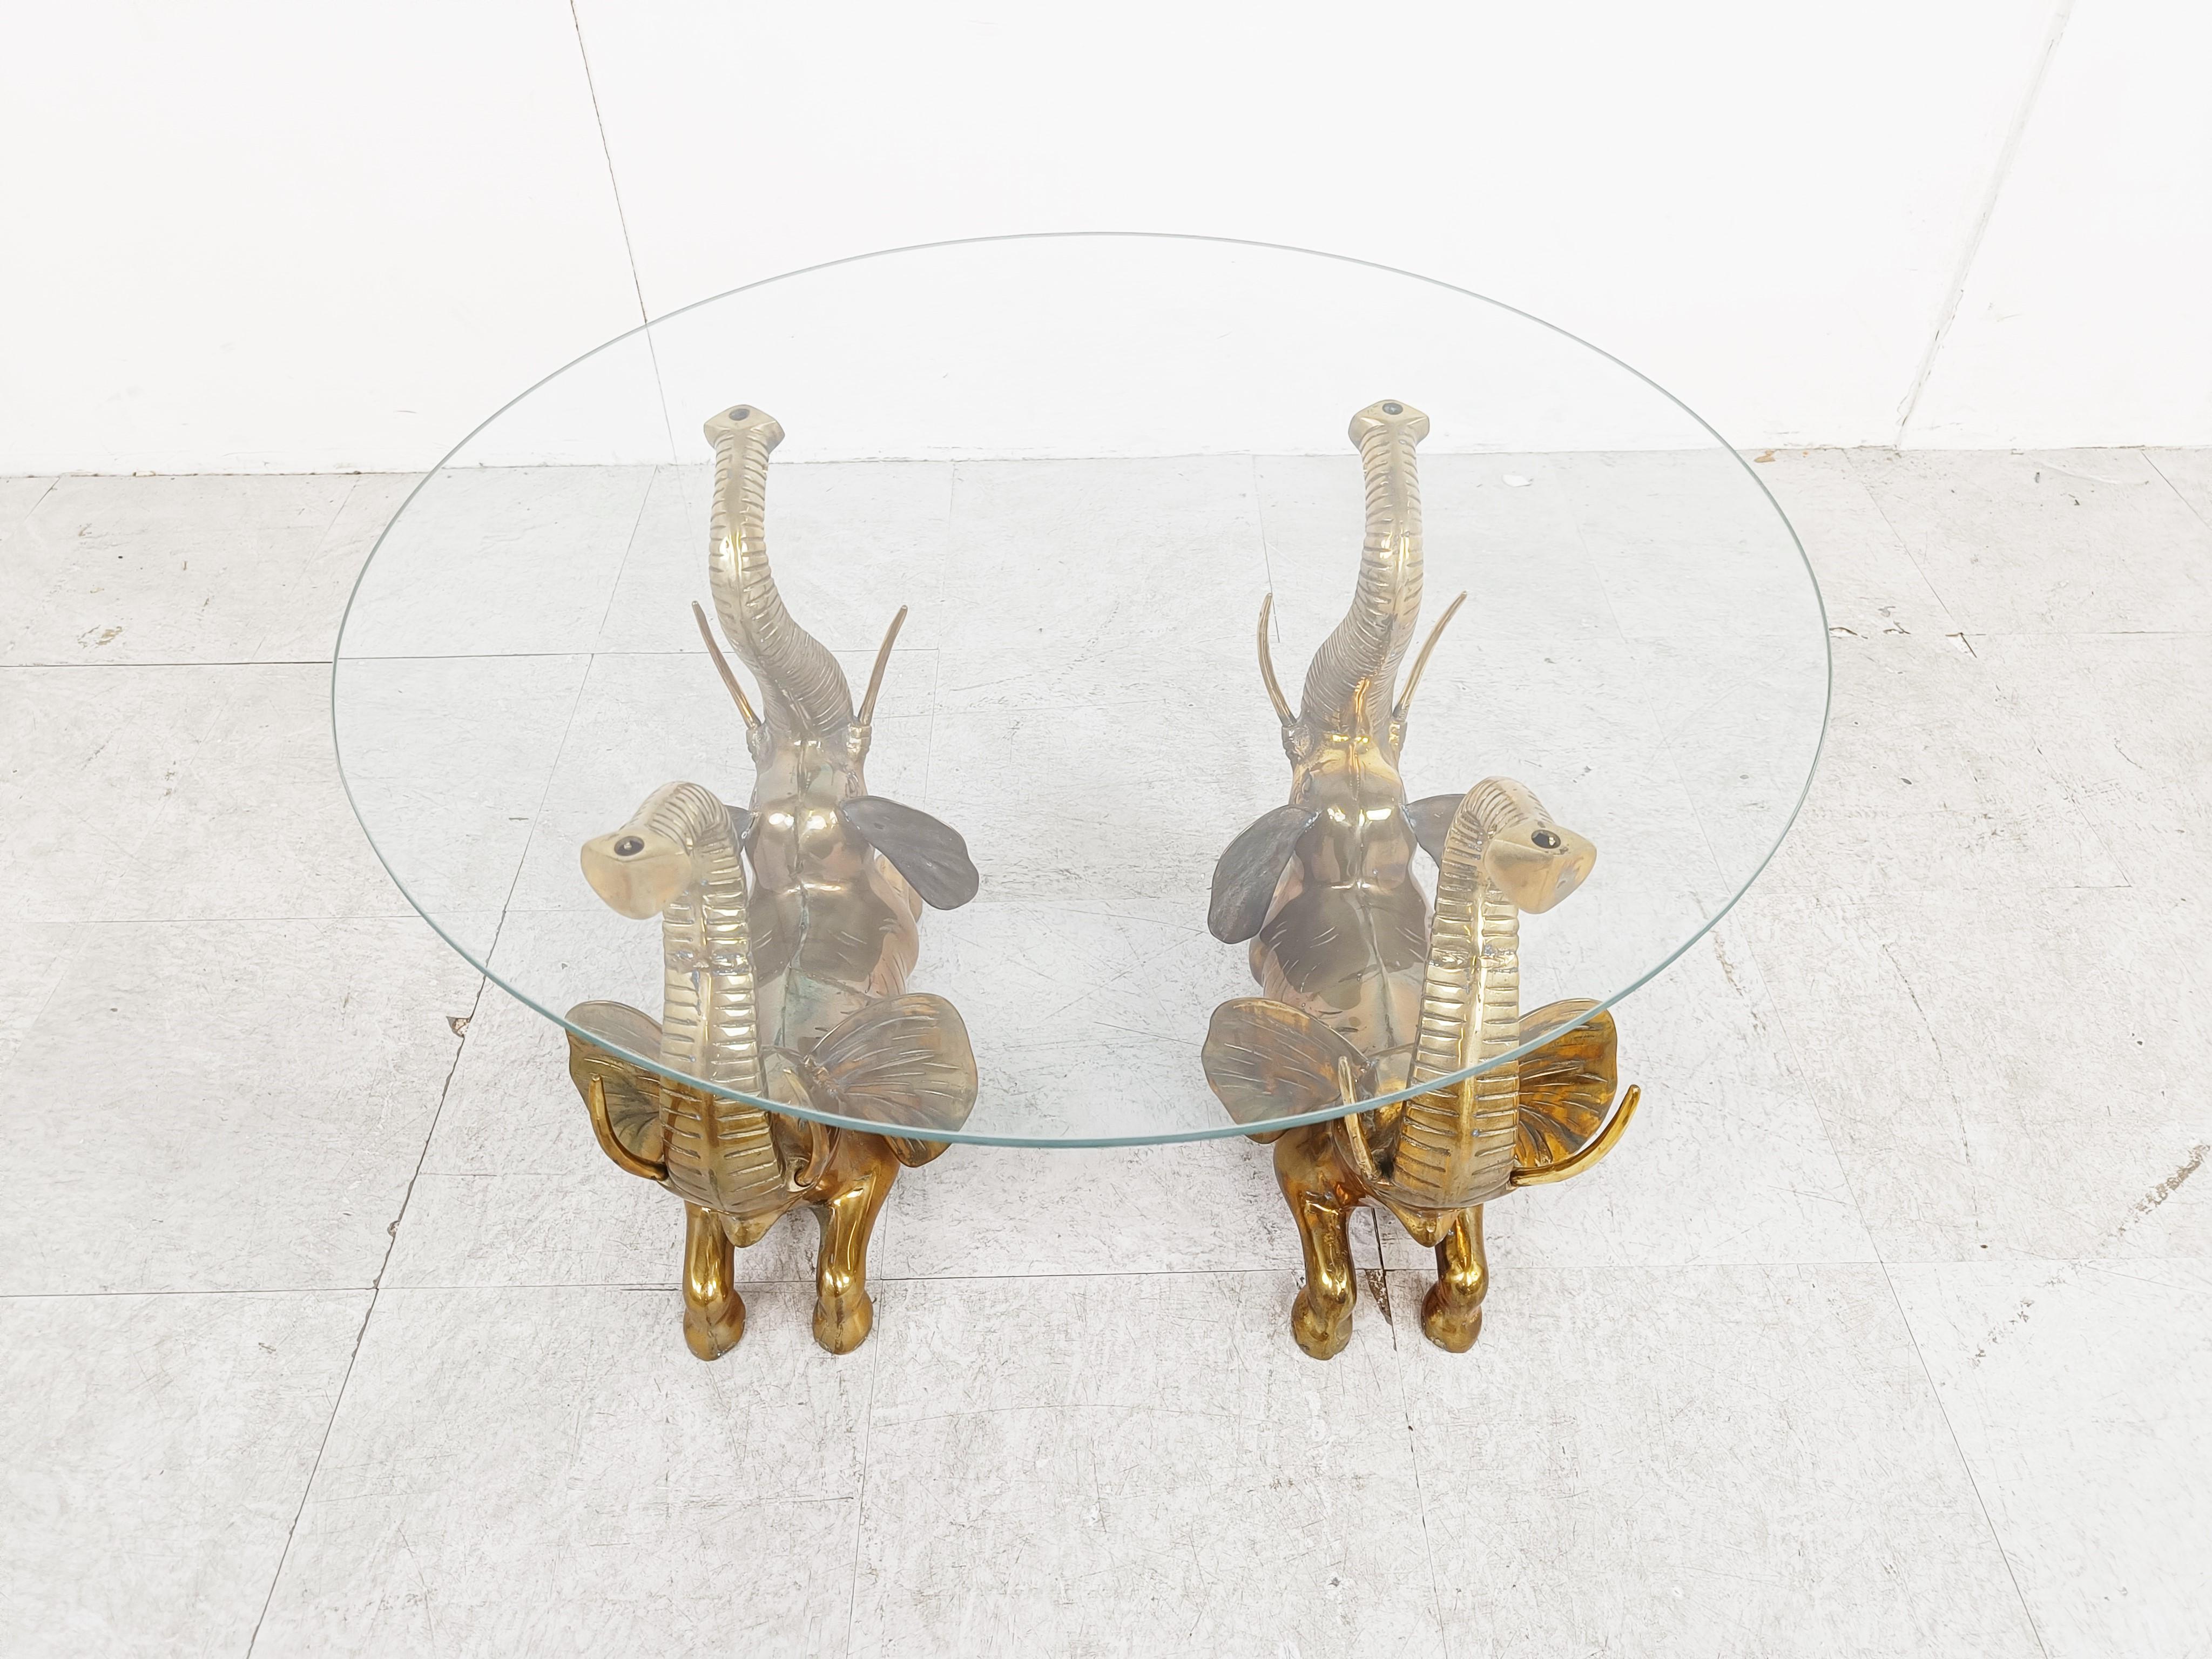 Hollywood regency brass elephant coffee table.

The coffee table consists of a brass base featuring 4 brass elephants and a clear glass top.

We have 4 of these tables available

Dimensions:
Height: 42cm/16.53